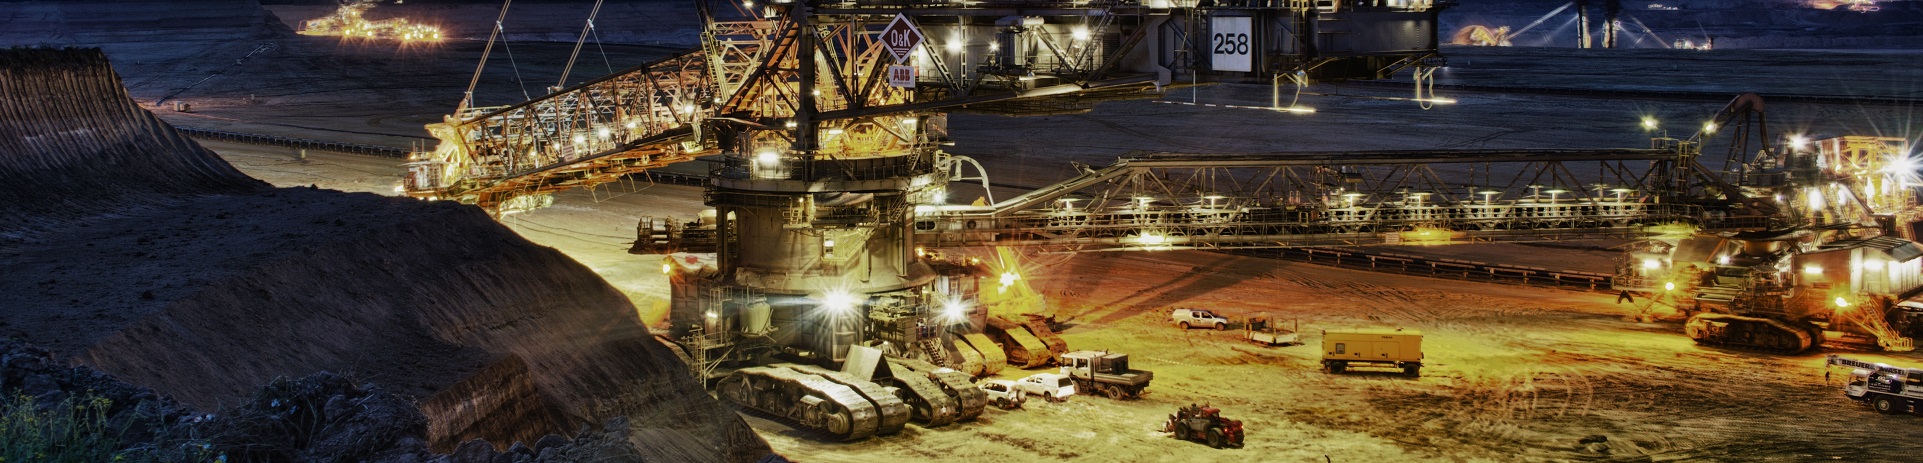 Enterprise Asset And Risk Intelligence Solutions For Mining And Minerals Processing Organisations